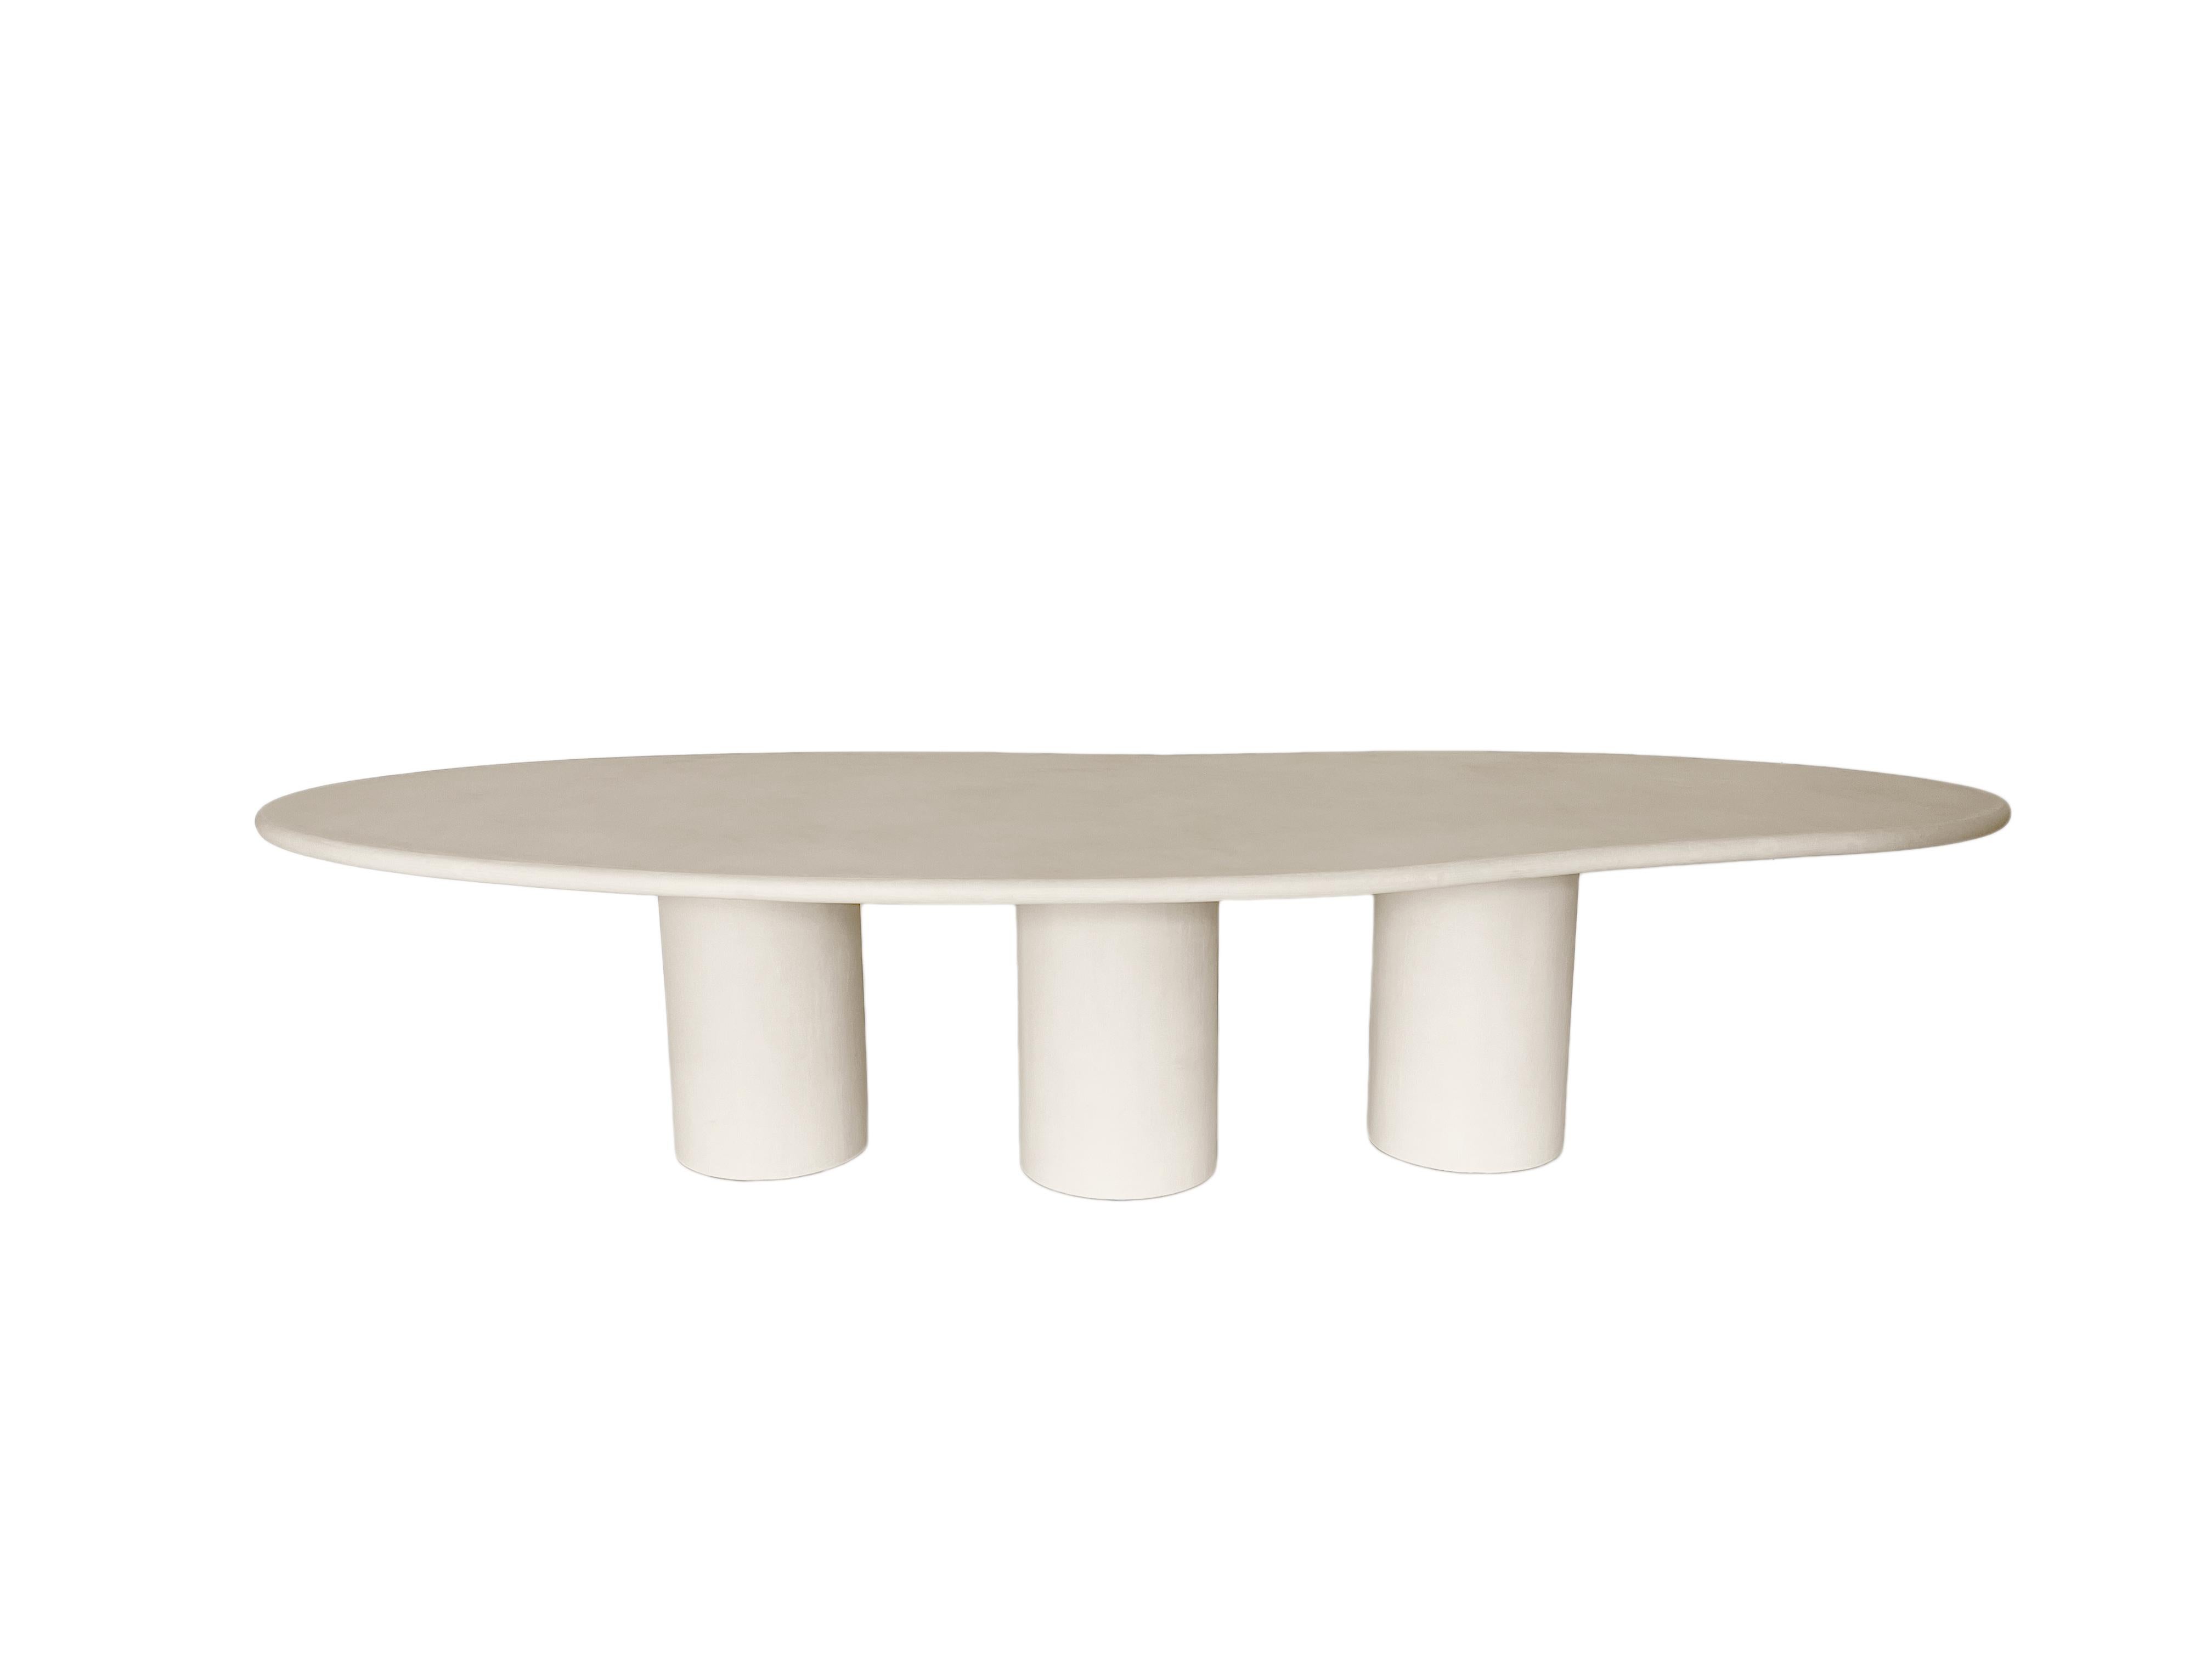 Contemporary Belgian design / Handcrafted / Organic shape / Ecological material / Natural lime plaster / Concrete look / Made on demand

Color pictures: BM08.5 Caffe Latte Ultra Light
Indoor use (price outdoor +10%)

The table is handcrafted with